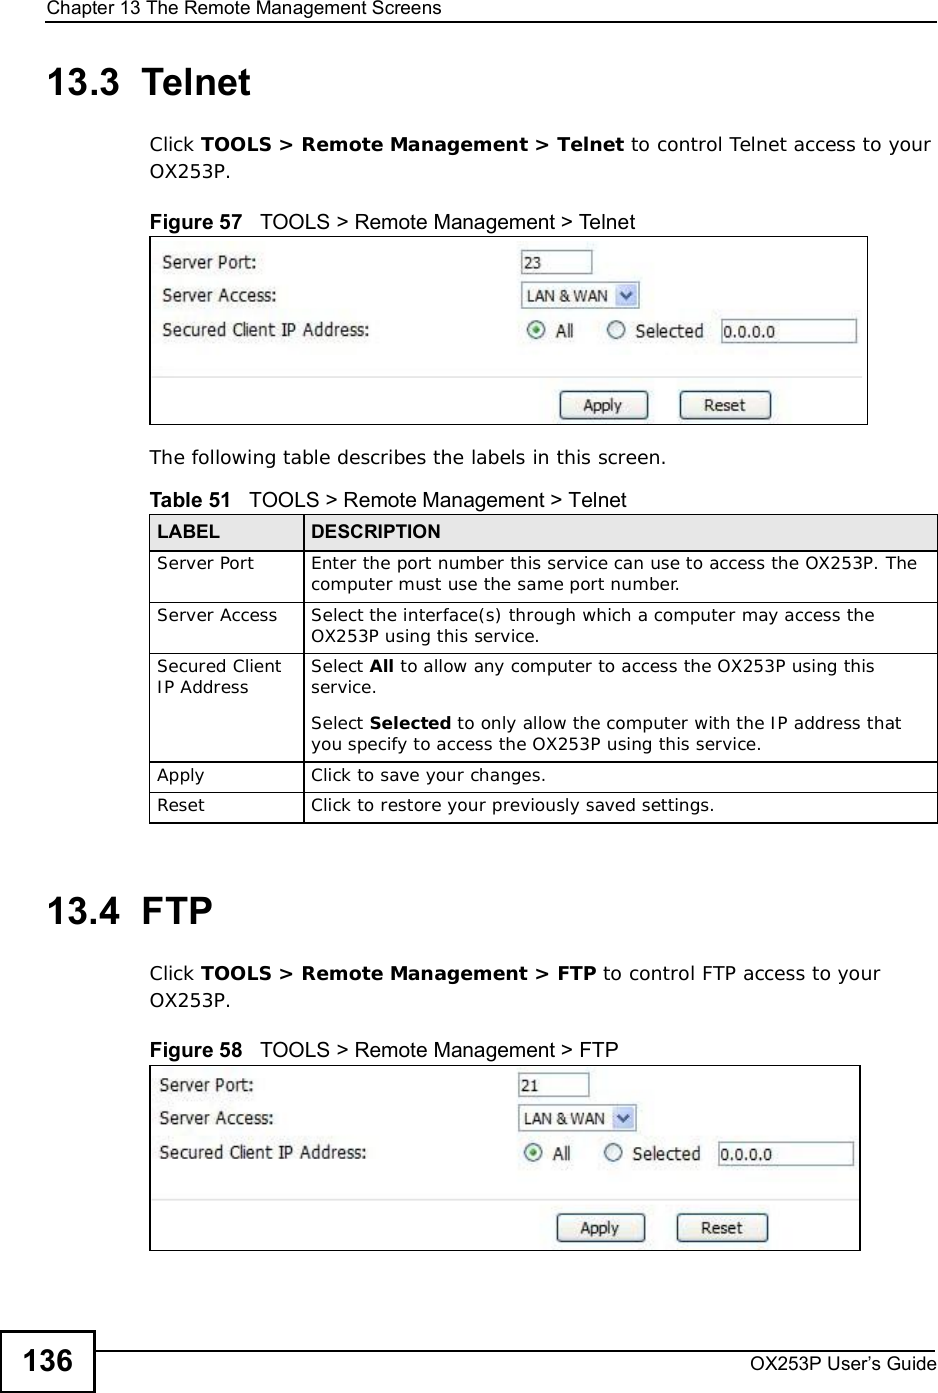 Chapter 13The Remote Management ScreensOX253P User’s Guide13613.3  TelnetClick TOOLS &gt; Remote Management &gt; Telnet to control Telnet access to your OX253P.Figure 57   TOOLS &gt; Remote Management &gt; TelnetThe following table describes the labels in this screen.13.4  FTPClick TOOLS &gt; Remote Management &gt; FTP to control FTP access to your OX253P.Figure 58   TOOLS &gt; Remote Management &gt; FTPTable 51   TOOLS &gt; Remote Management &gt; TelnetLABEL DESCRIPTIONServer Port Enter the port number this service can use to access the OX253P. The computer must use the same port number.Server Access Select the interface(s) through which a computer may access the OX253P using this service.Secured Client IP Address Select All to allow any computer to access the OX253P using this service.Select Selected to only allow the computer with the IP address that you specify to access the OX253P using this service.Apply Click to save your changes.Reset Click to restore your previously saved settings.